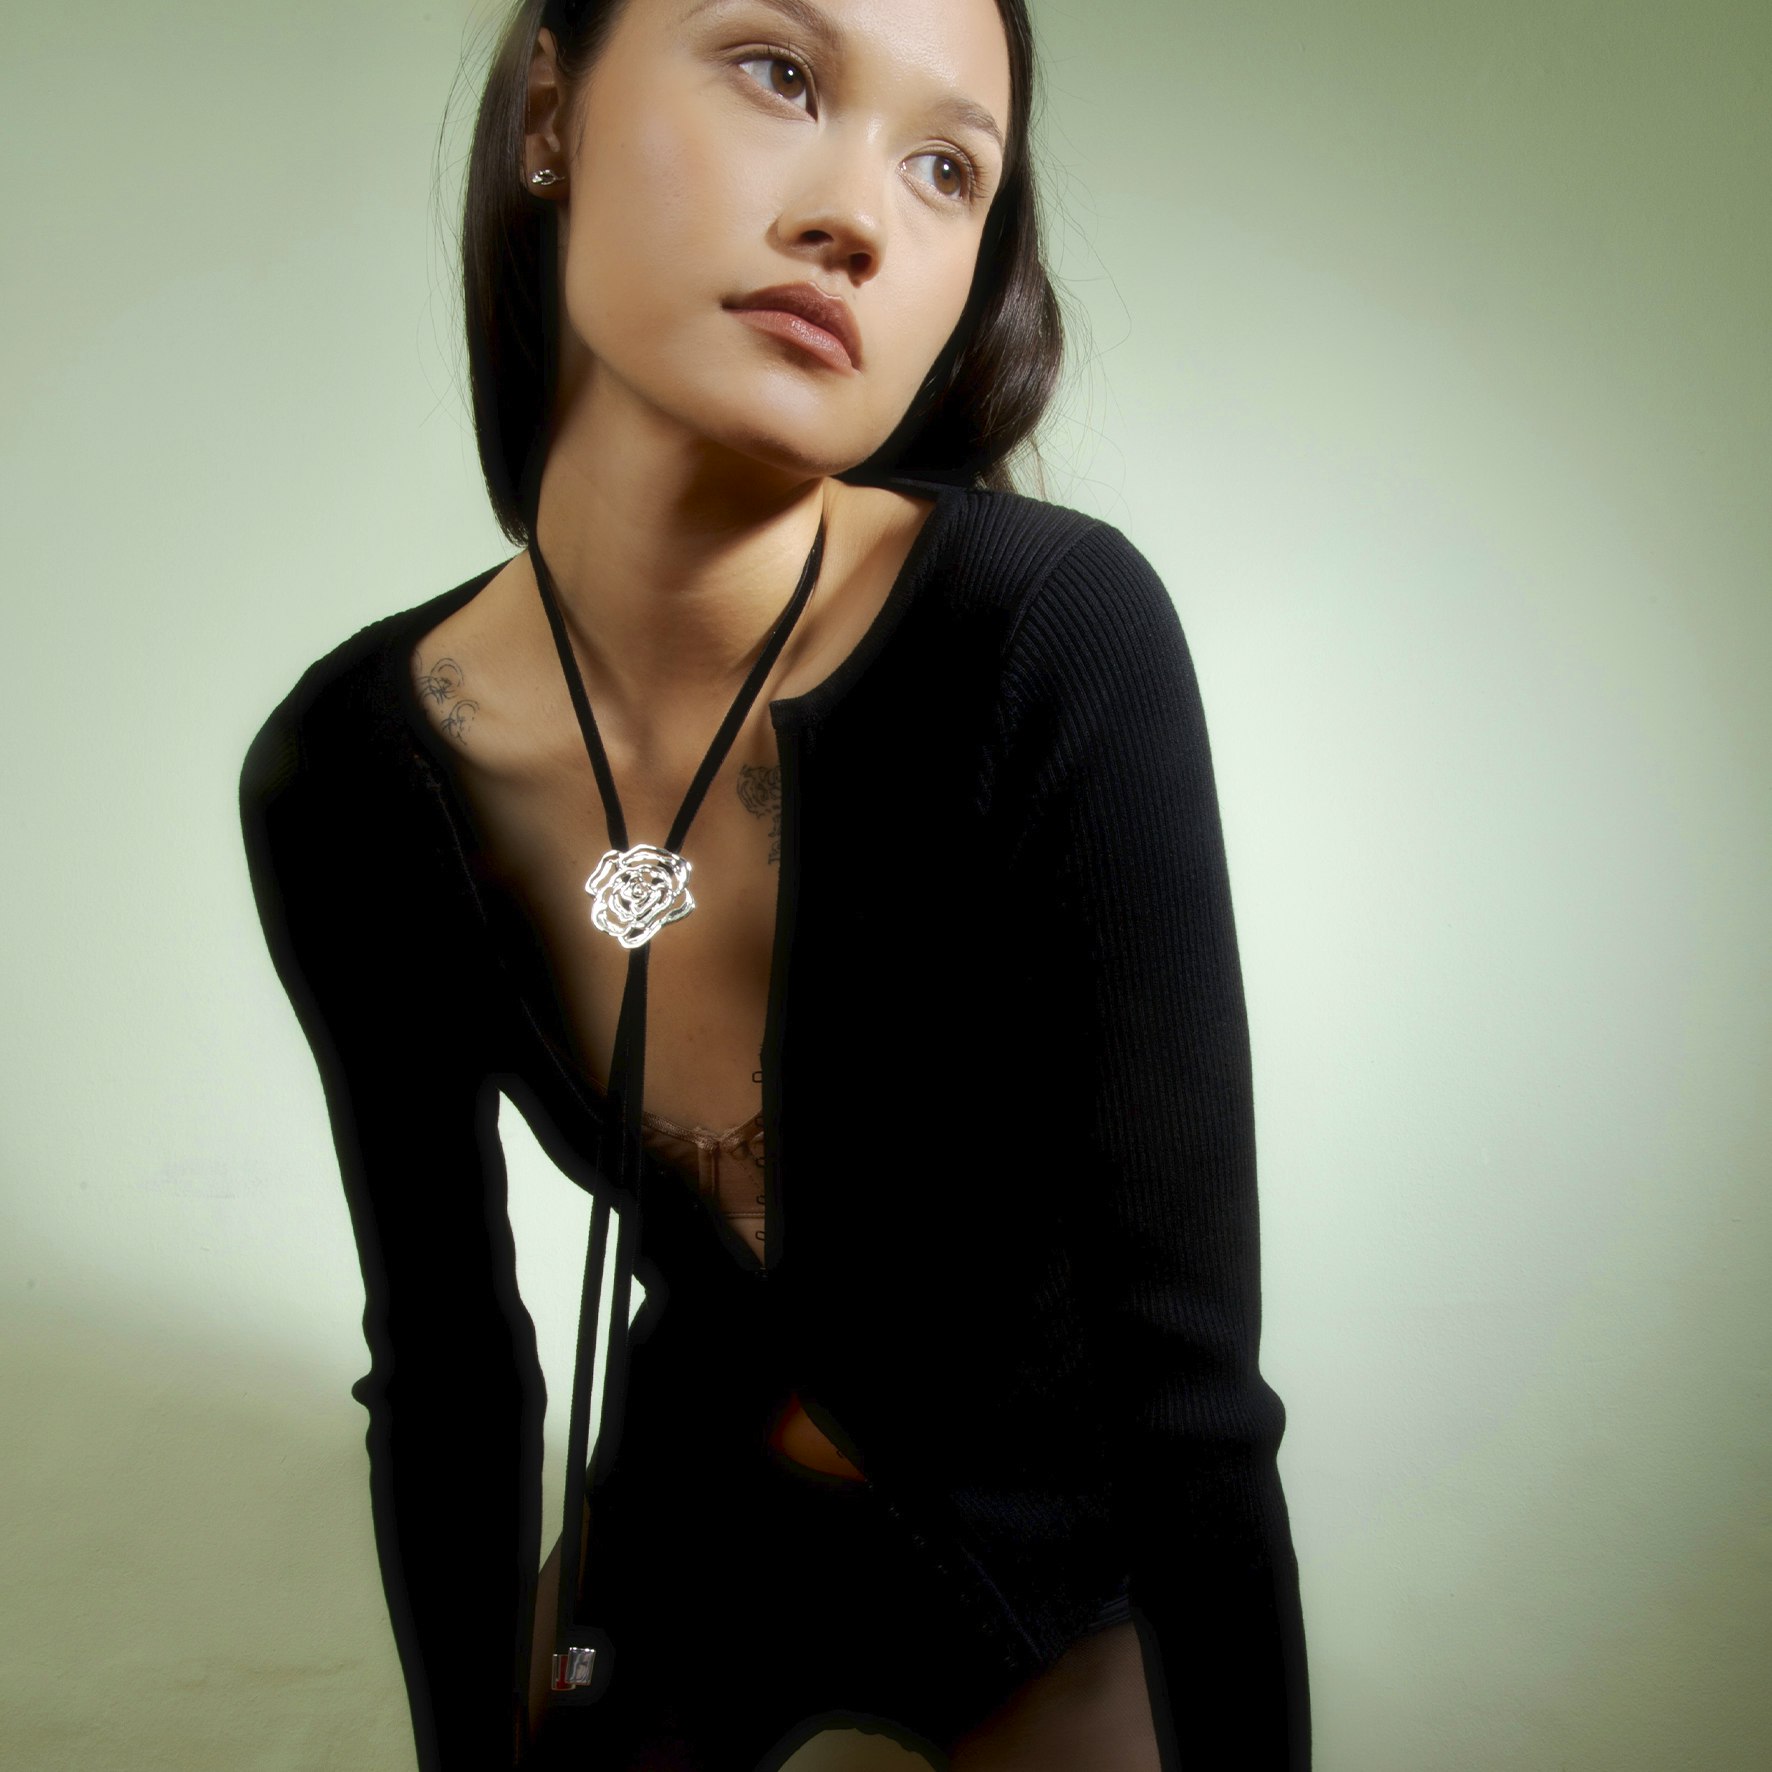 Rosle Bolo Tie Necklace from Jane Kønig in Goldplated Silver Sterling 925